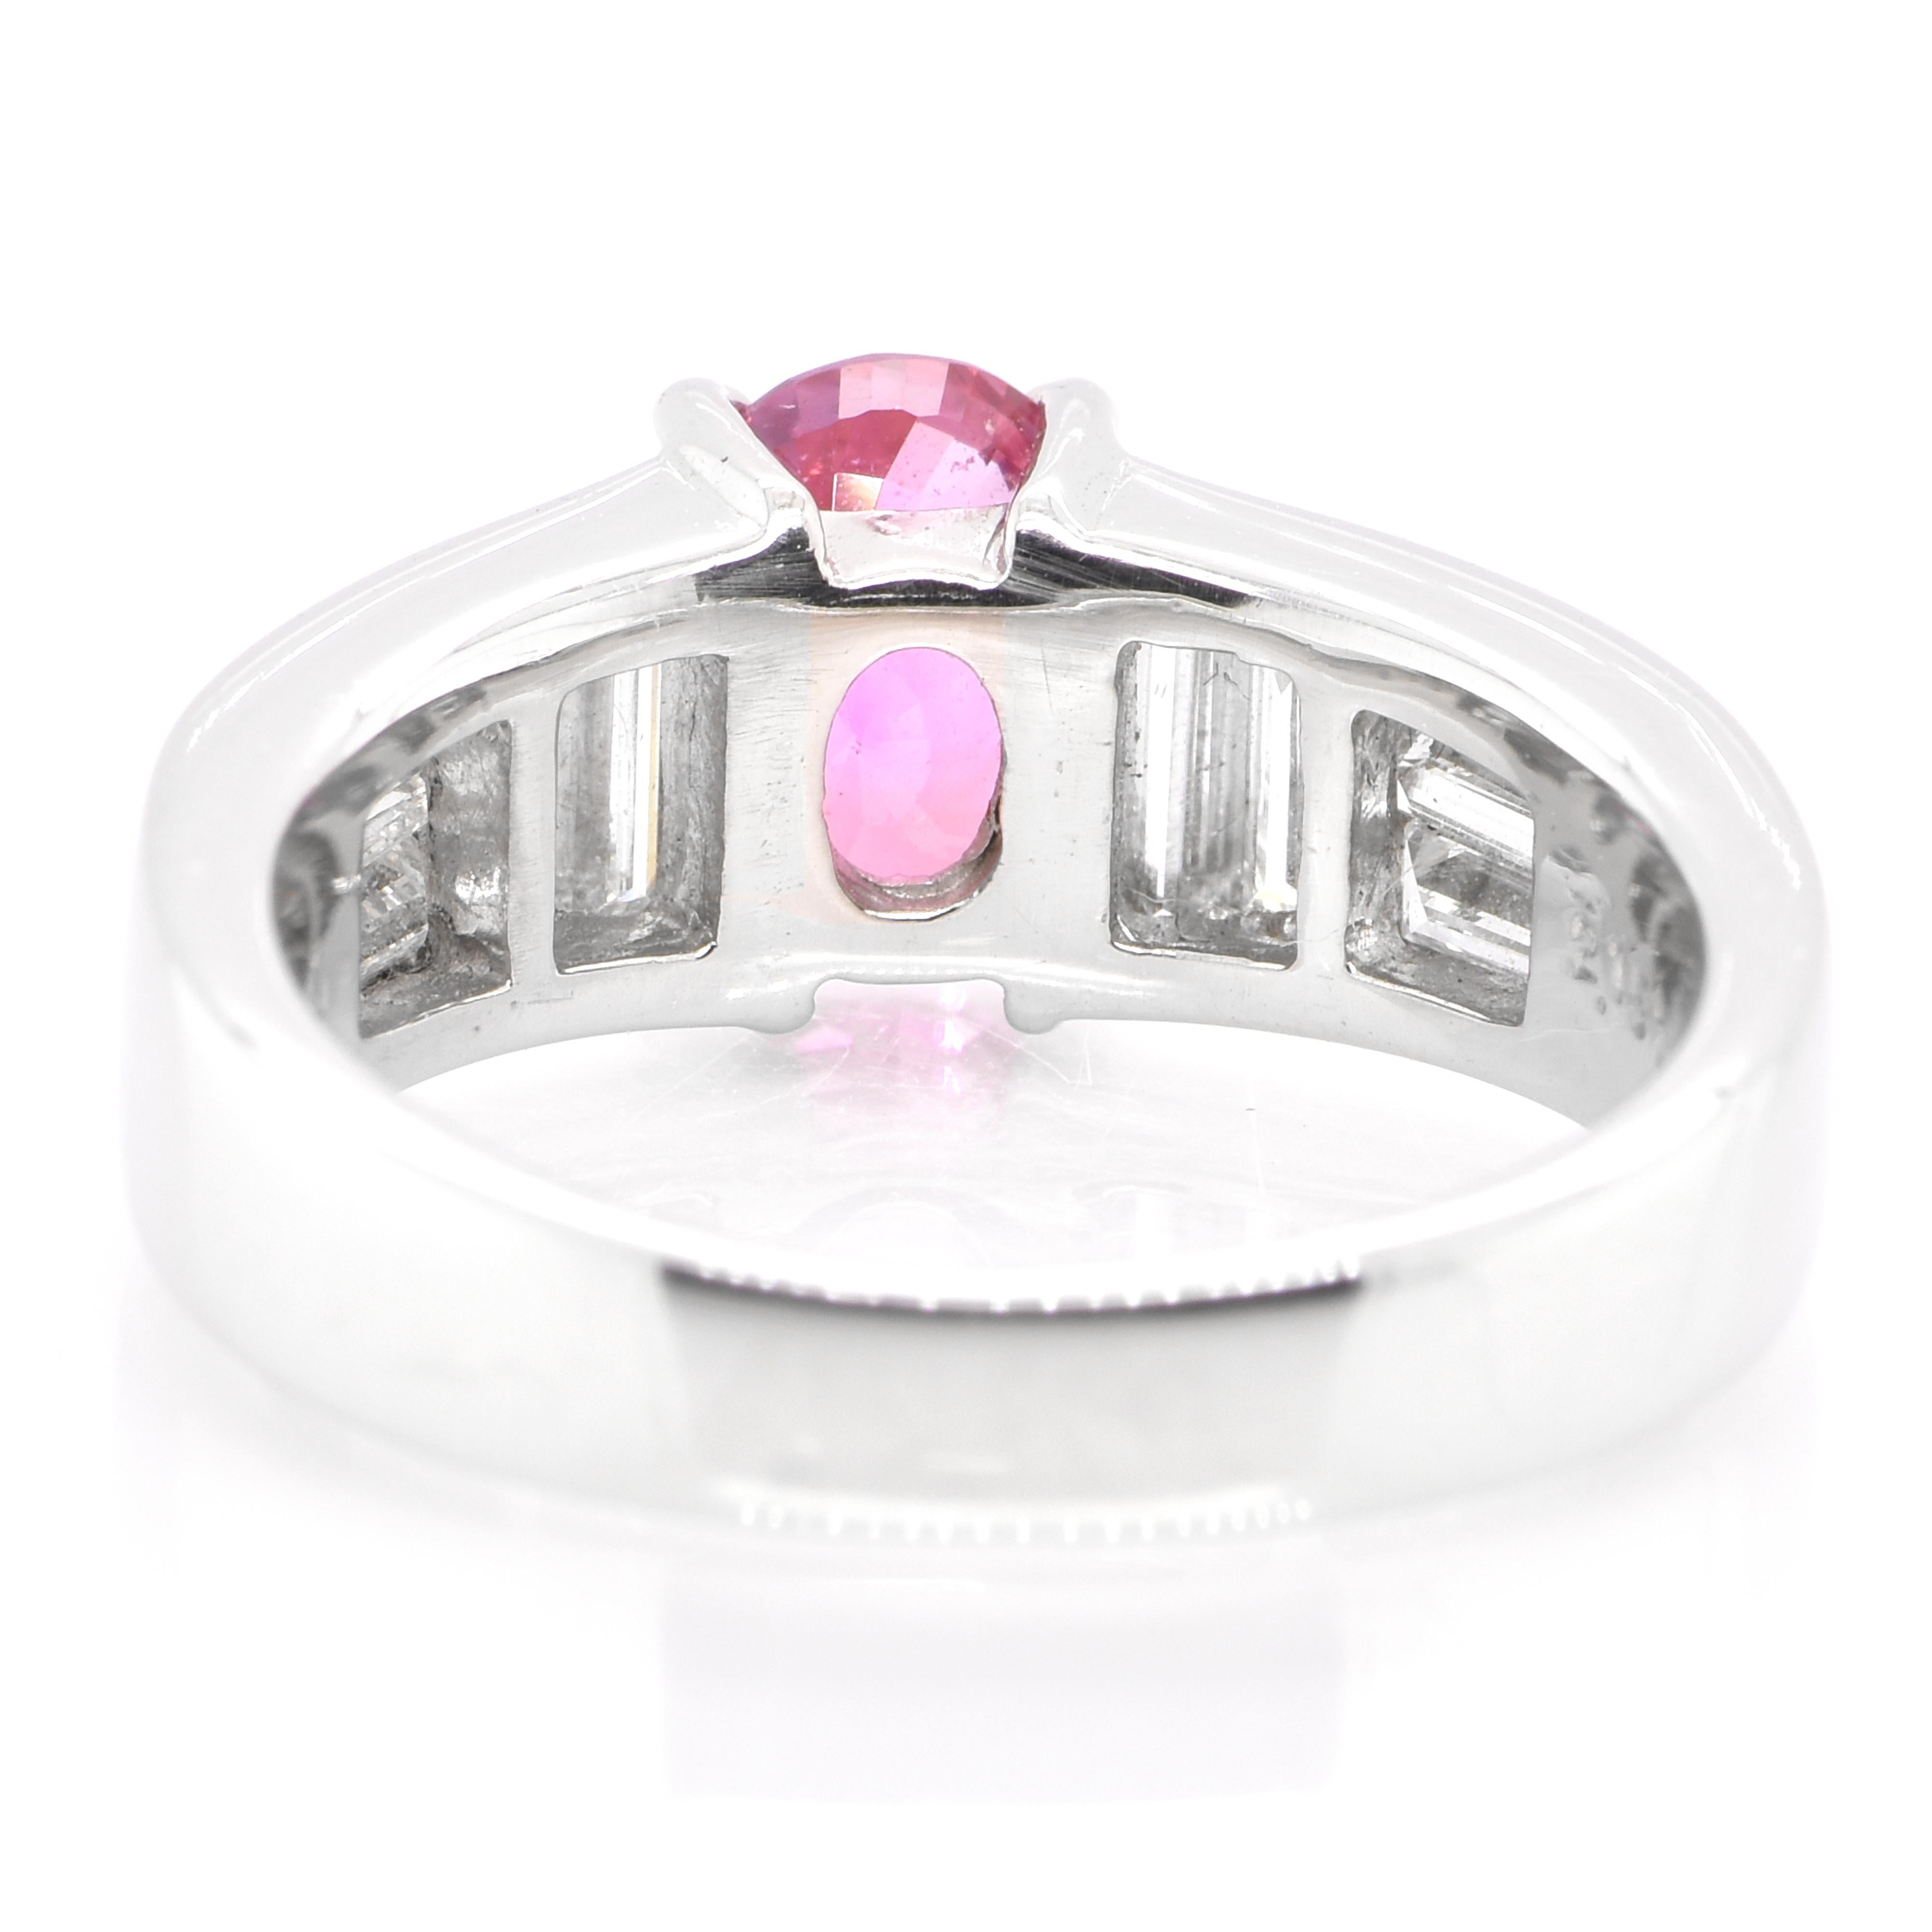 Oval Cut 2.15 Carat Natural Pink Sapphire and Diamond Art Deco Ring Set in Platinum